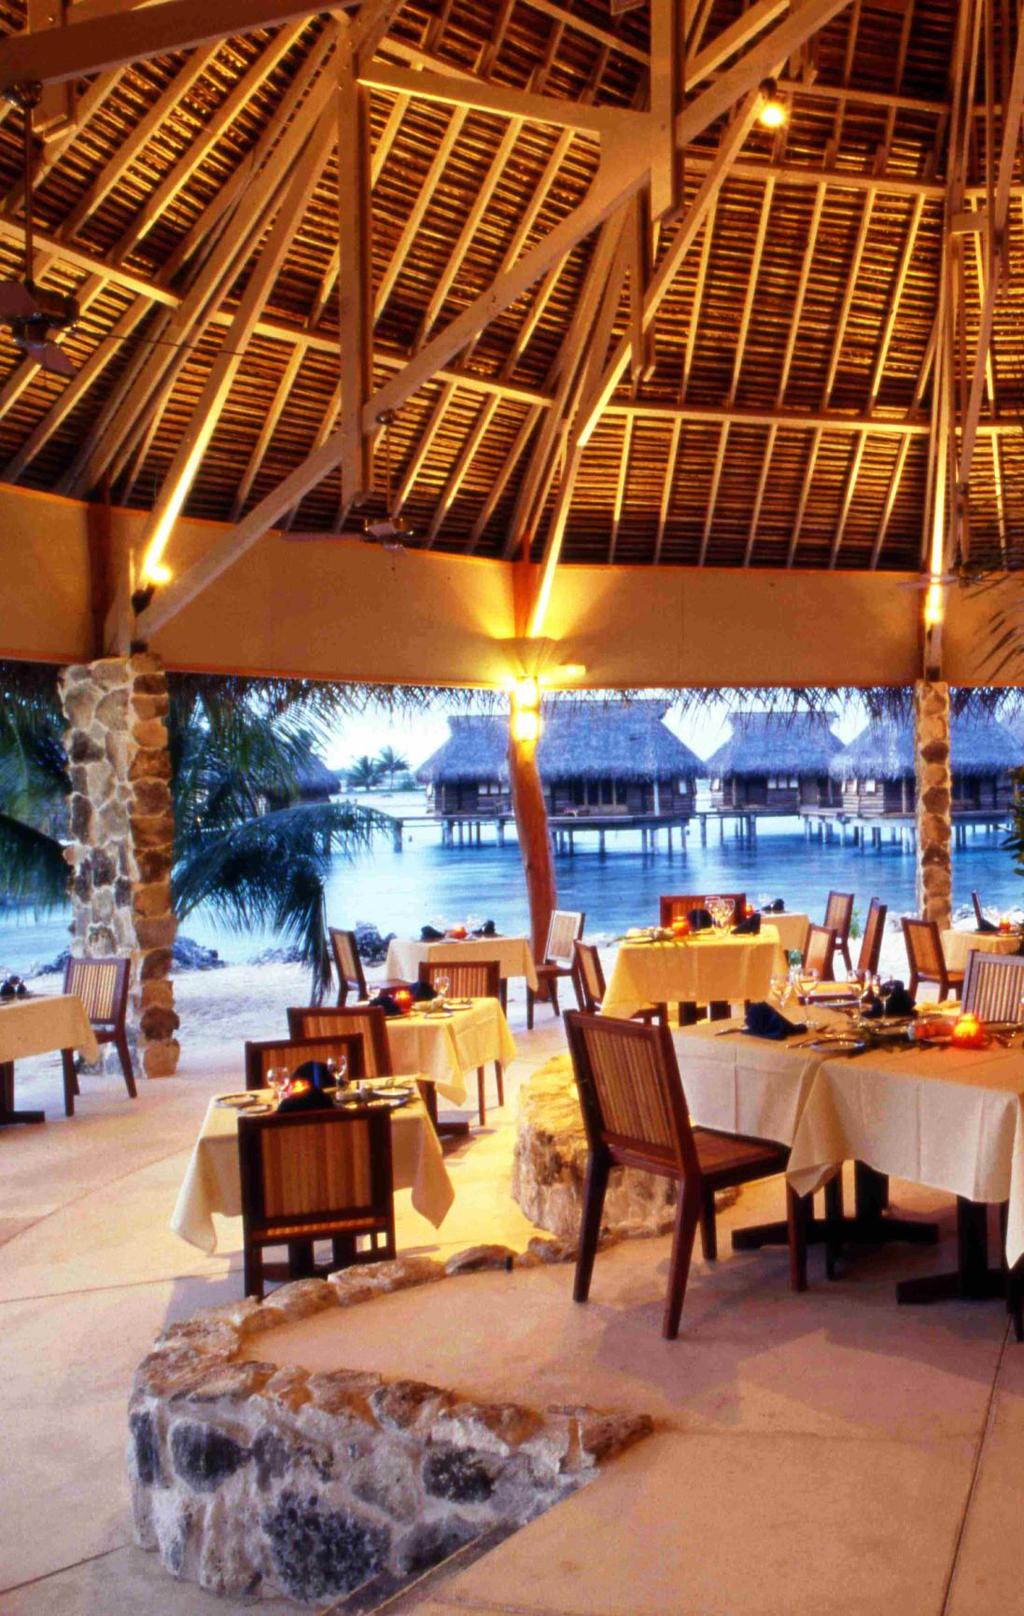 DINING The intimate resort offers one restaurant and bar for guests to enjoy. Cuisine is prepared using the freshest local ingredients. Private dining experiences can also be arranged upon request.